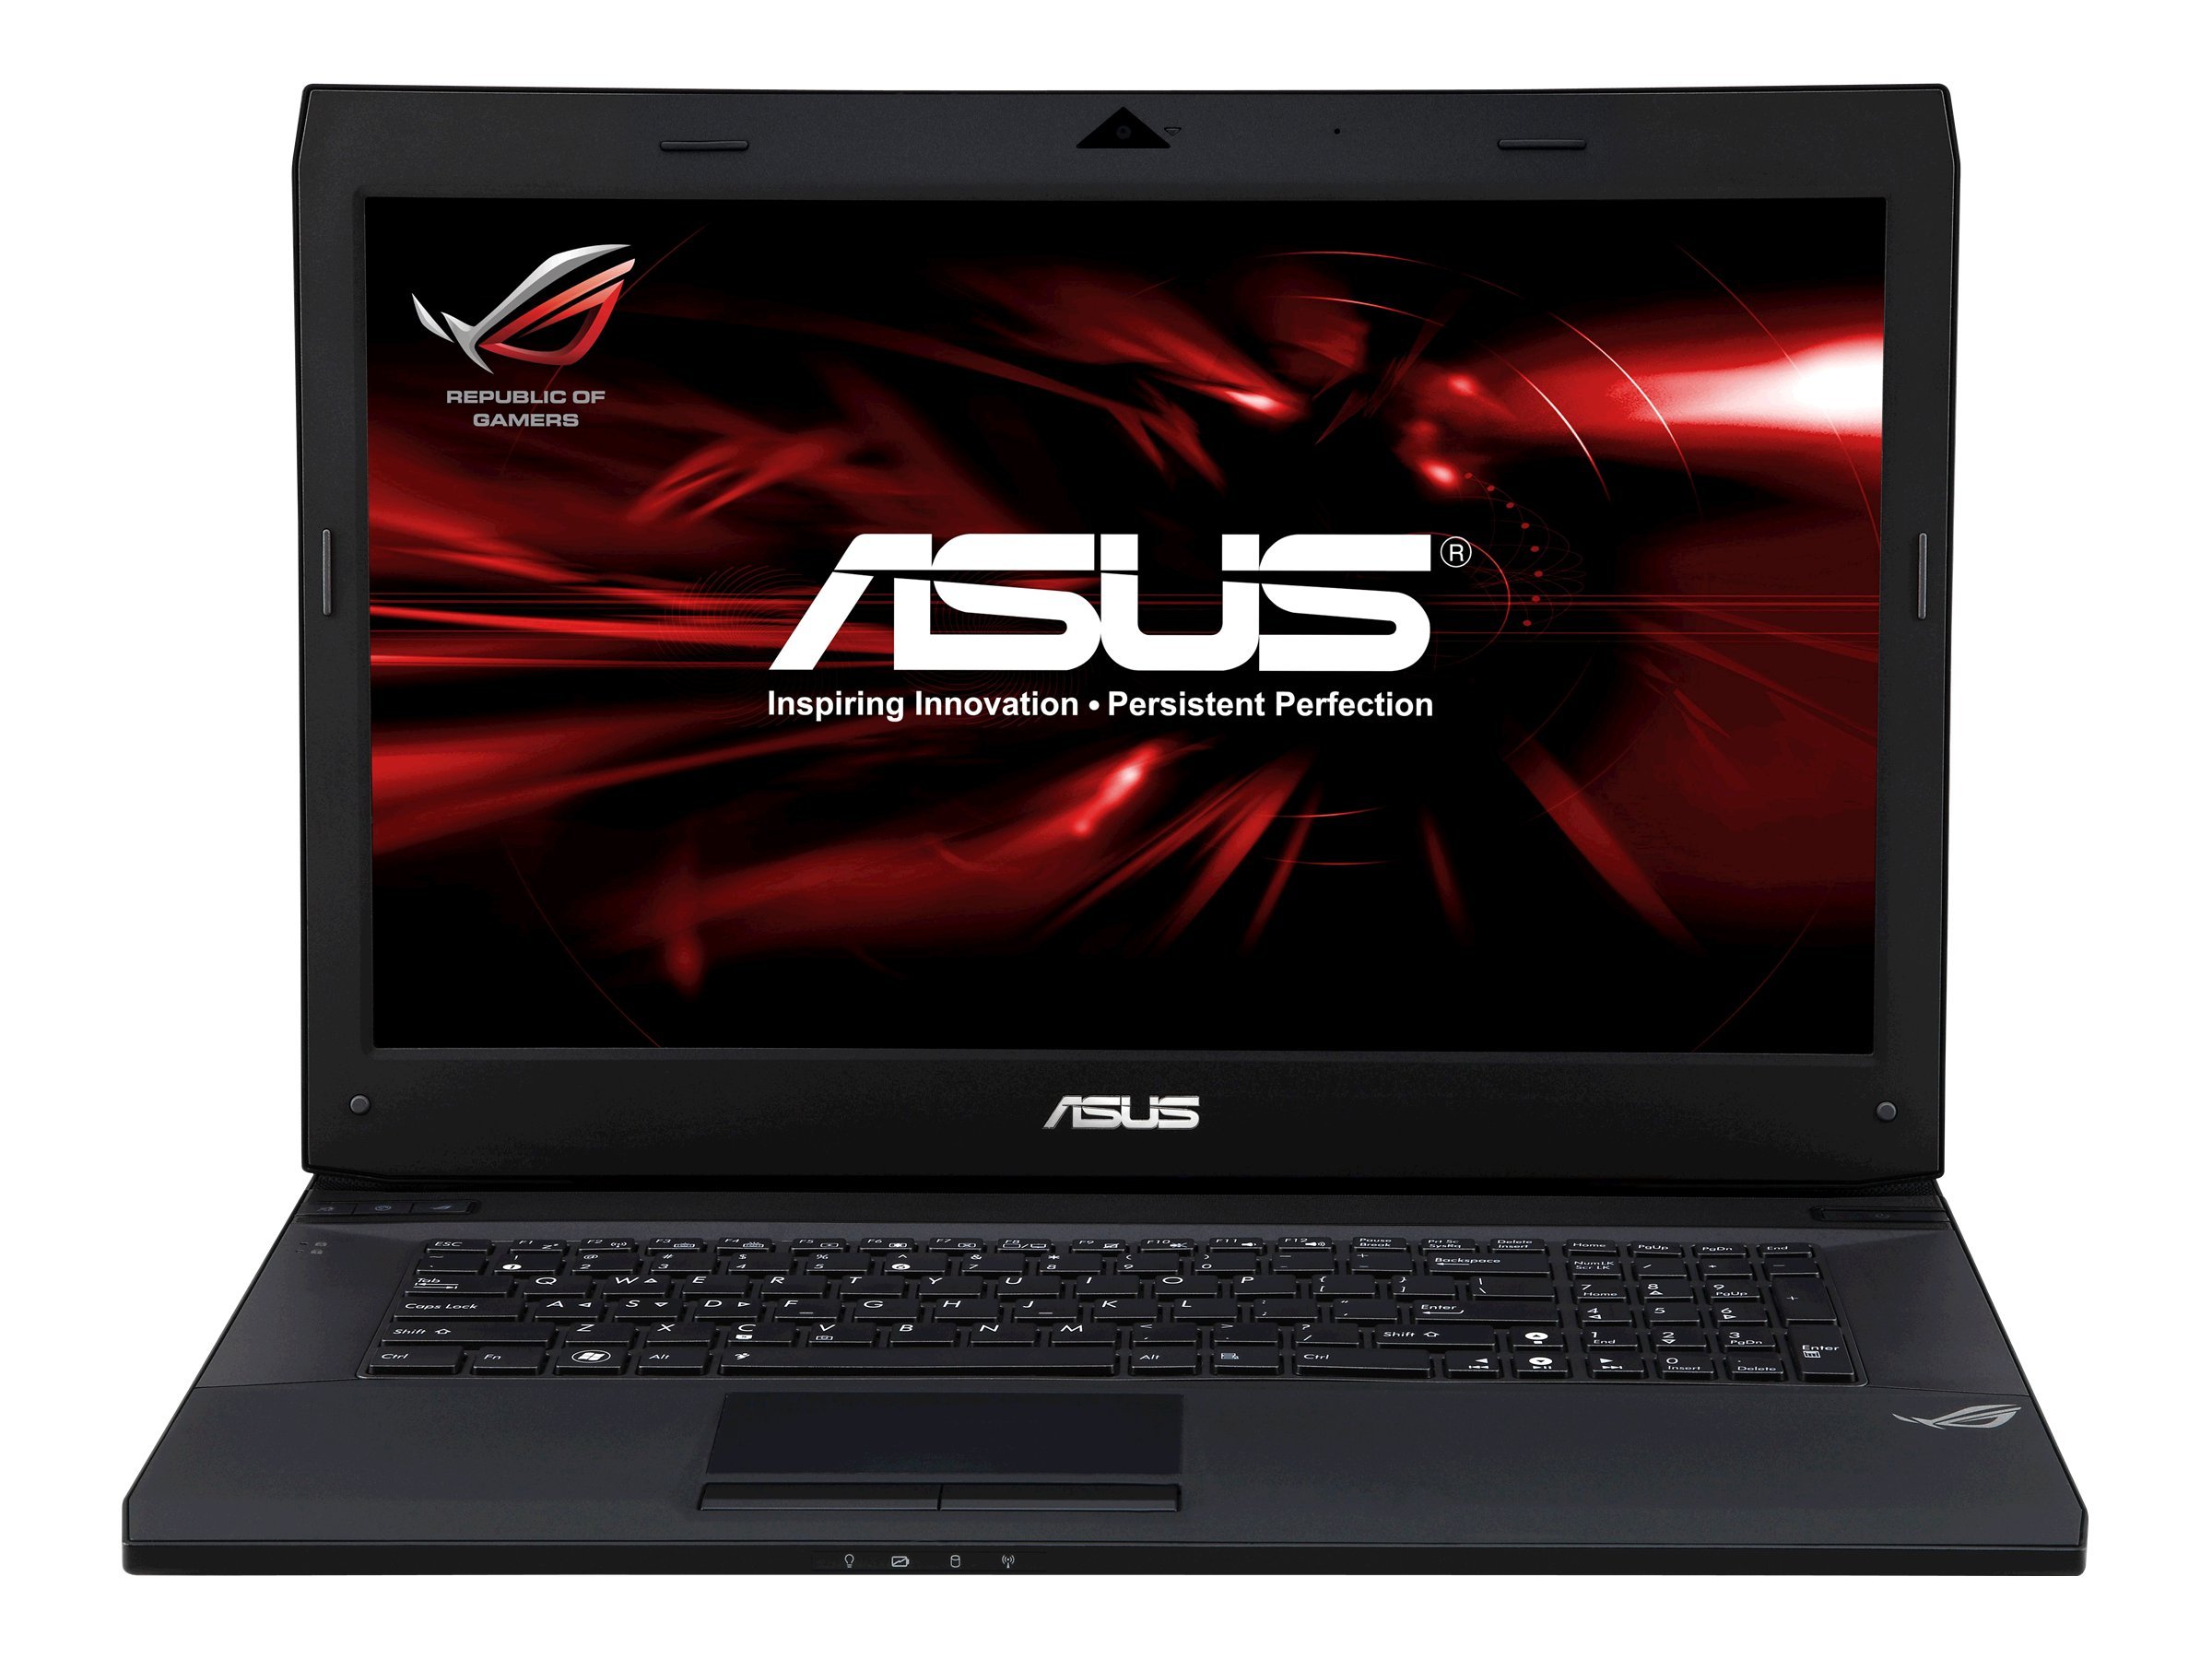 Profit gen Opdater ASUS G73SW (A1) - full specs, details and review